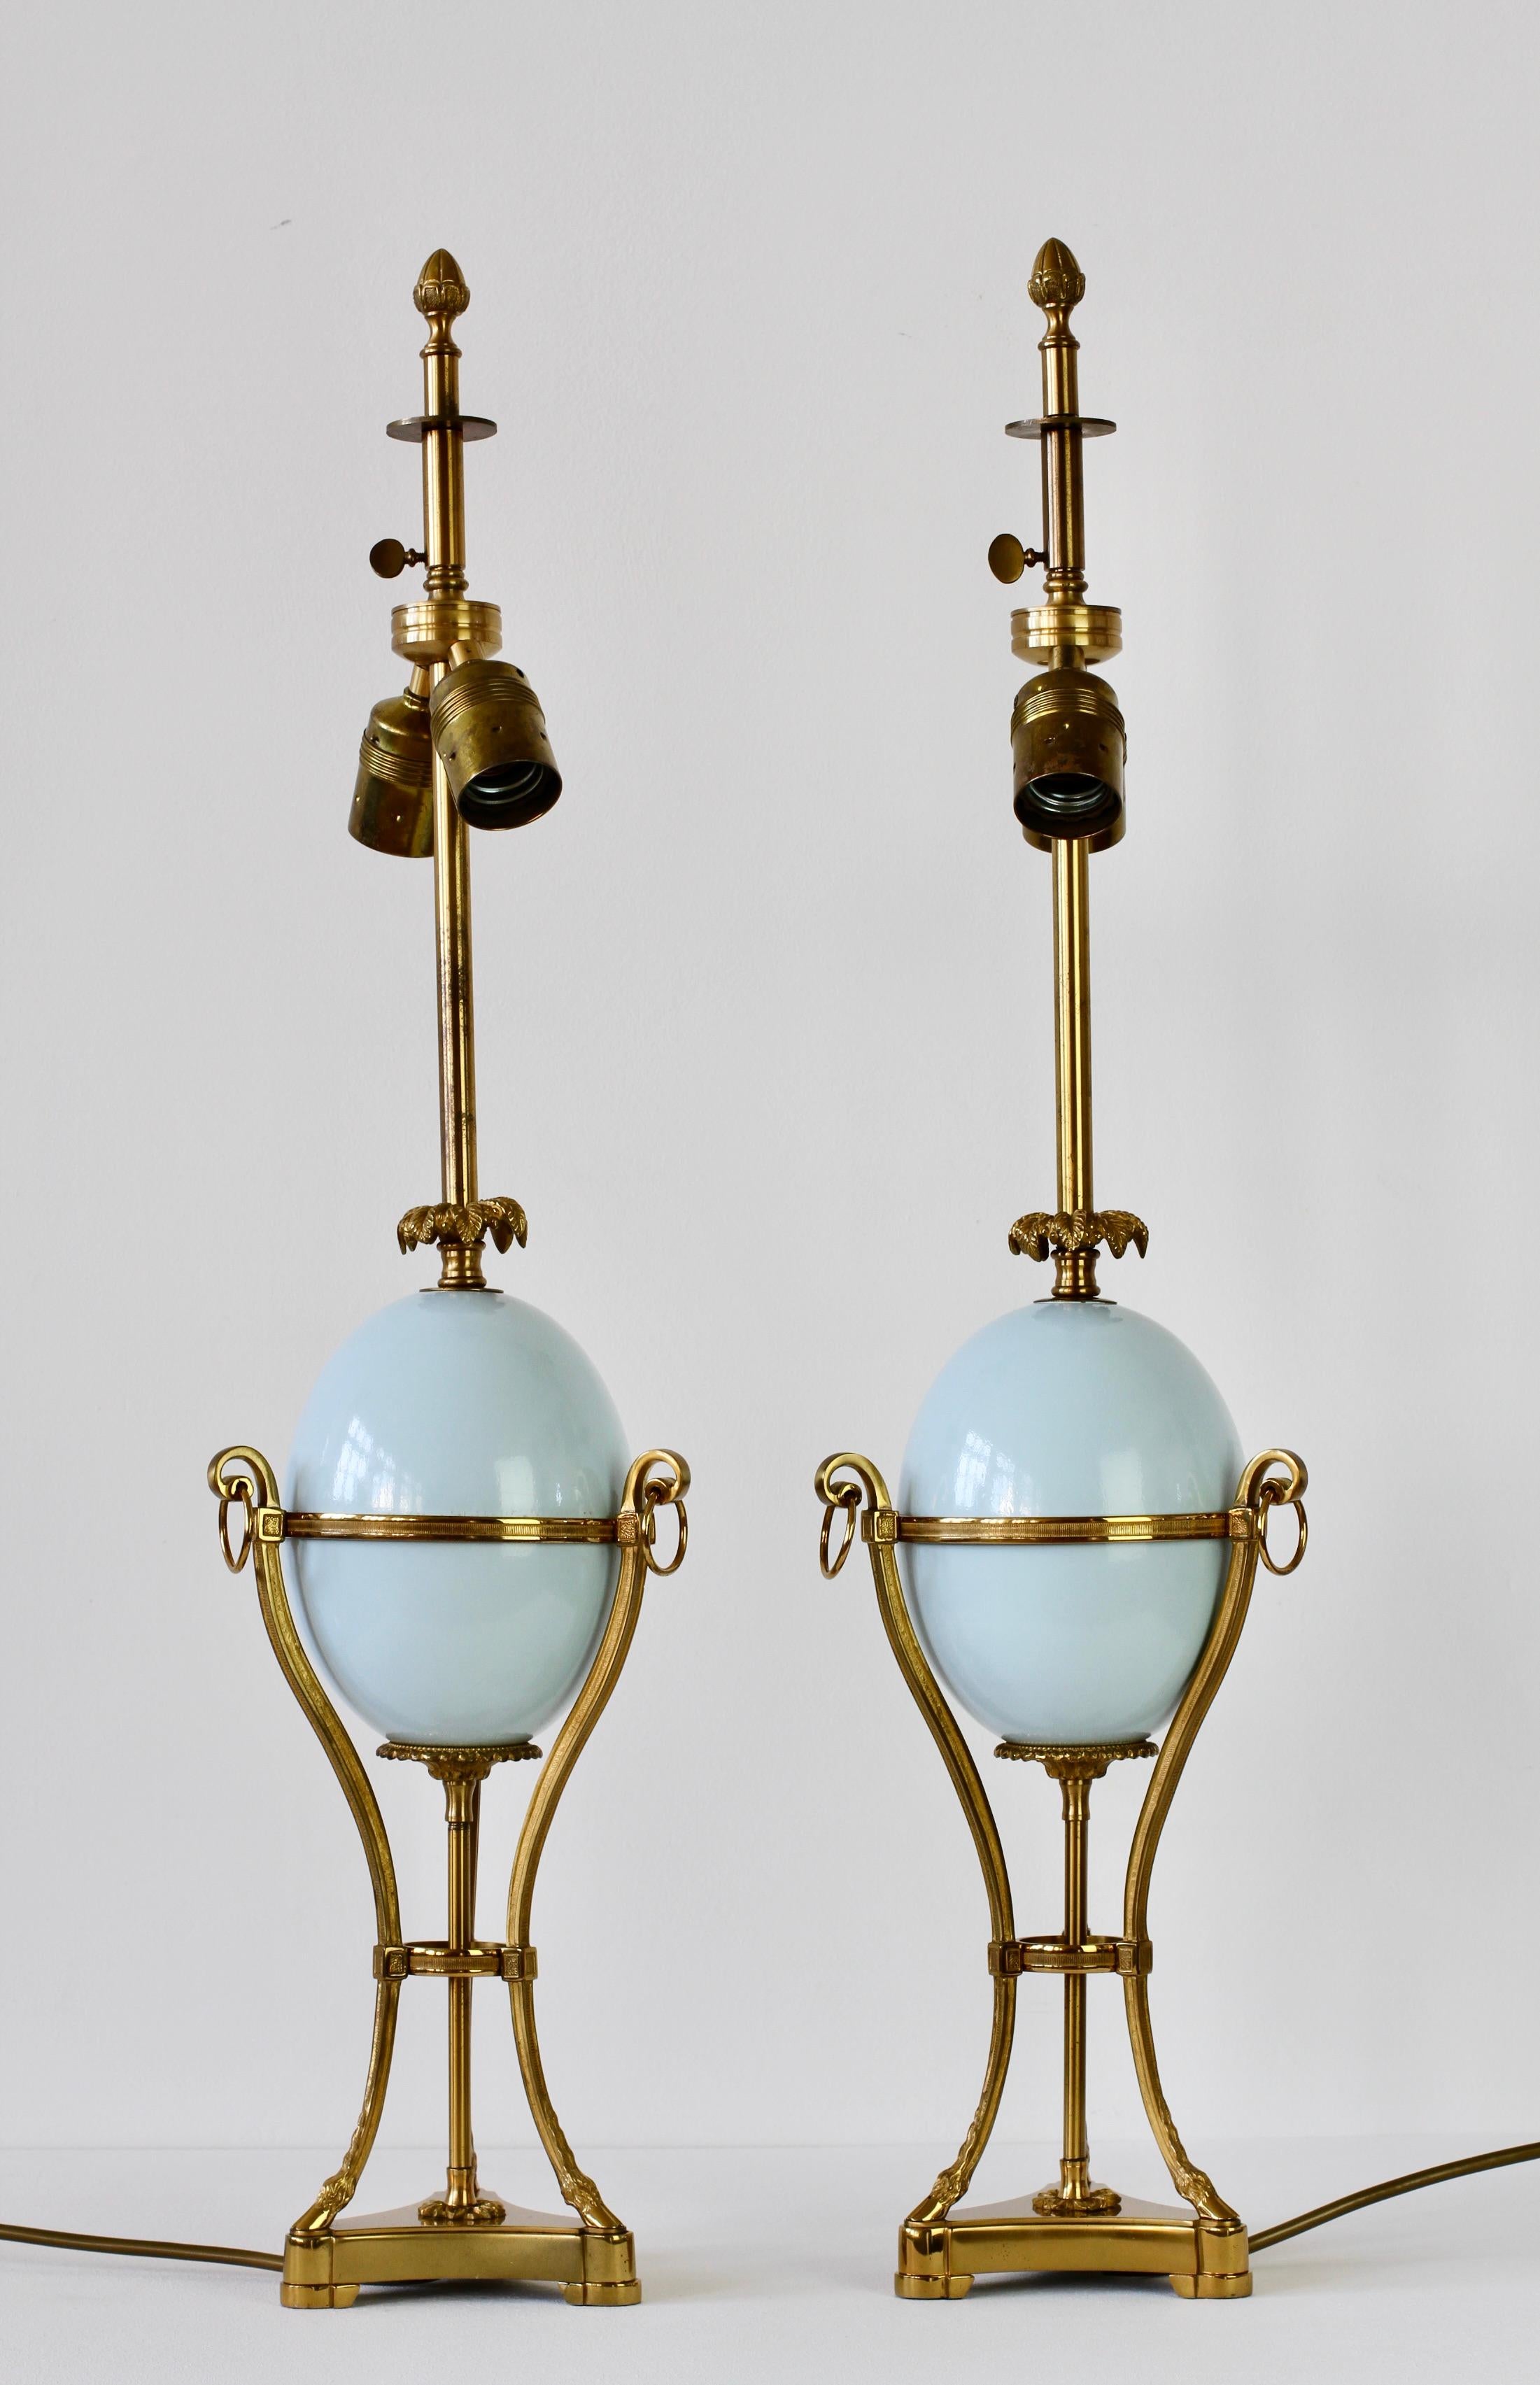 Maison Charles attributed midcentury vintage pair of French brass neoclassical lamps centred on ostrich eggs. Stunning craftsmanship with beautifully cast brass elements, the palm leaf details above the powder blue eggs, the acorn final on the